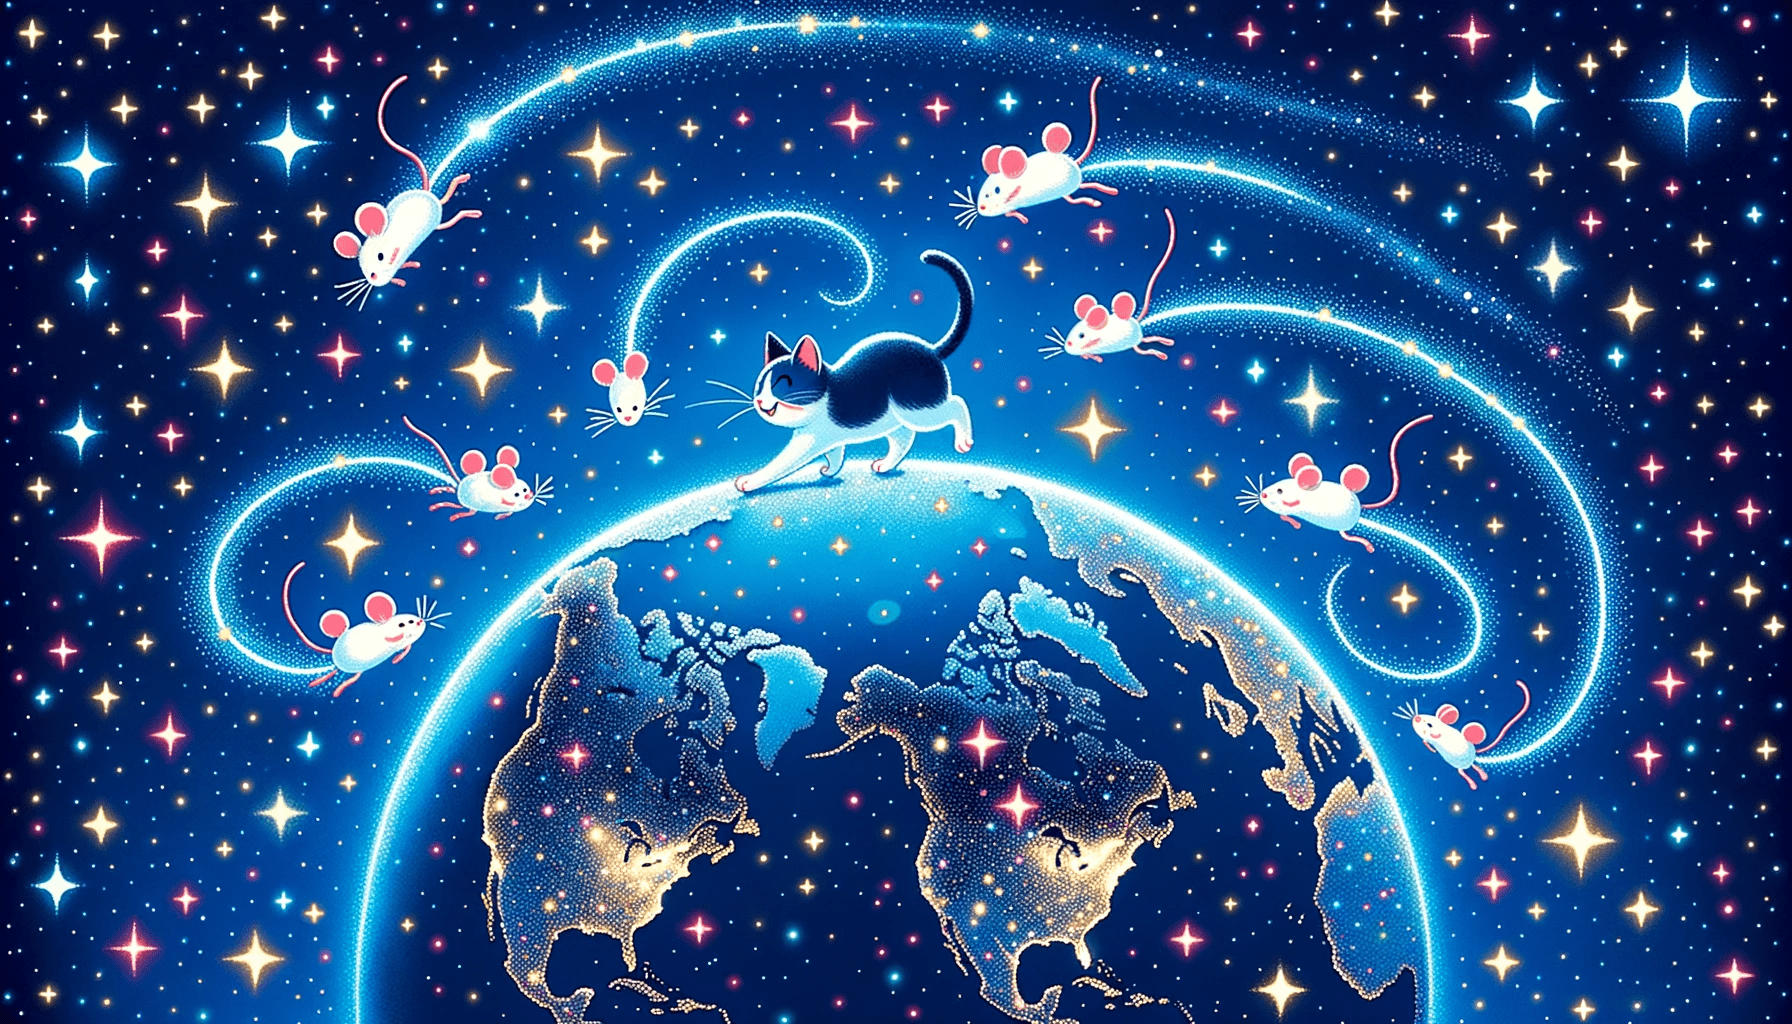 Illustration_-Above-the-blue-planet-Earth-a-cat-with-a-celestial-glow-chases